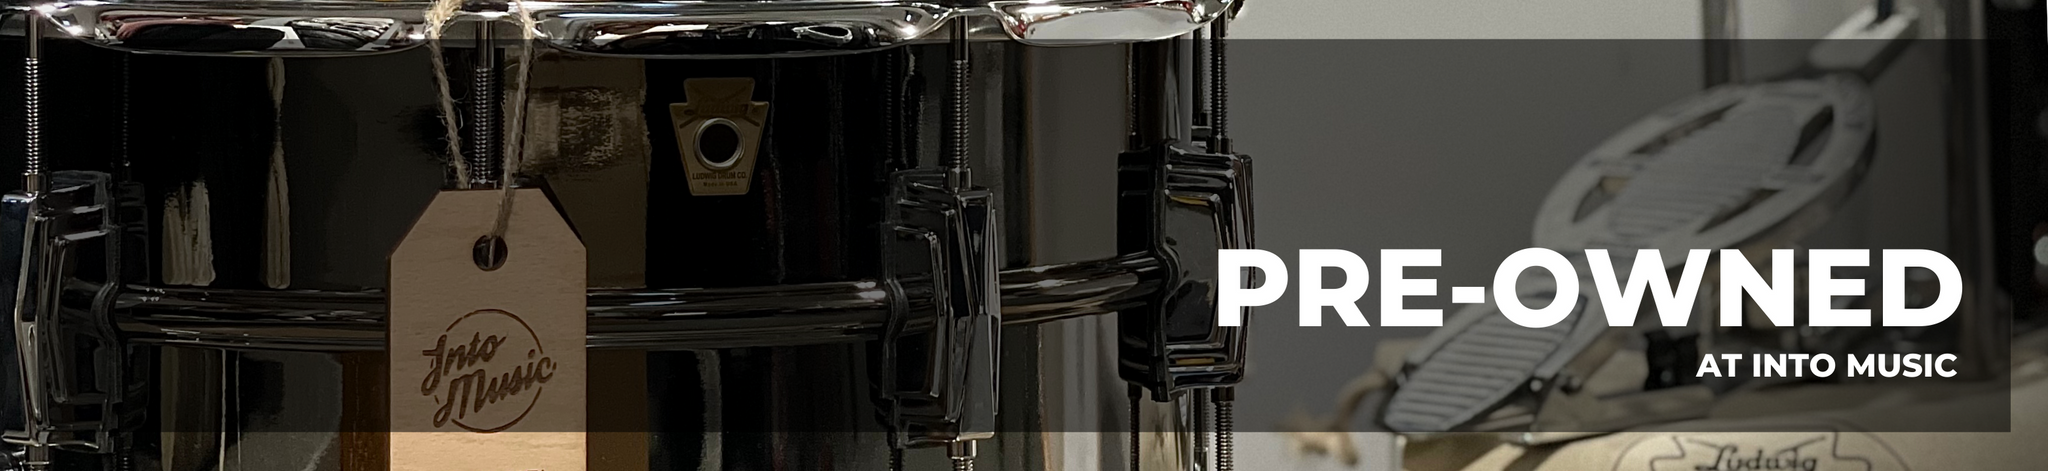 Shop pre-owned drums and percussion at Into Music Drum Store